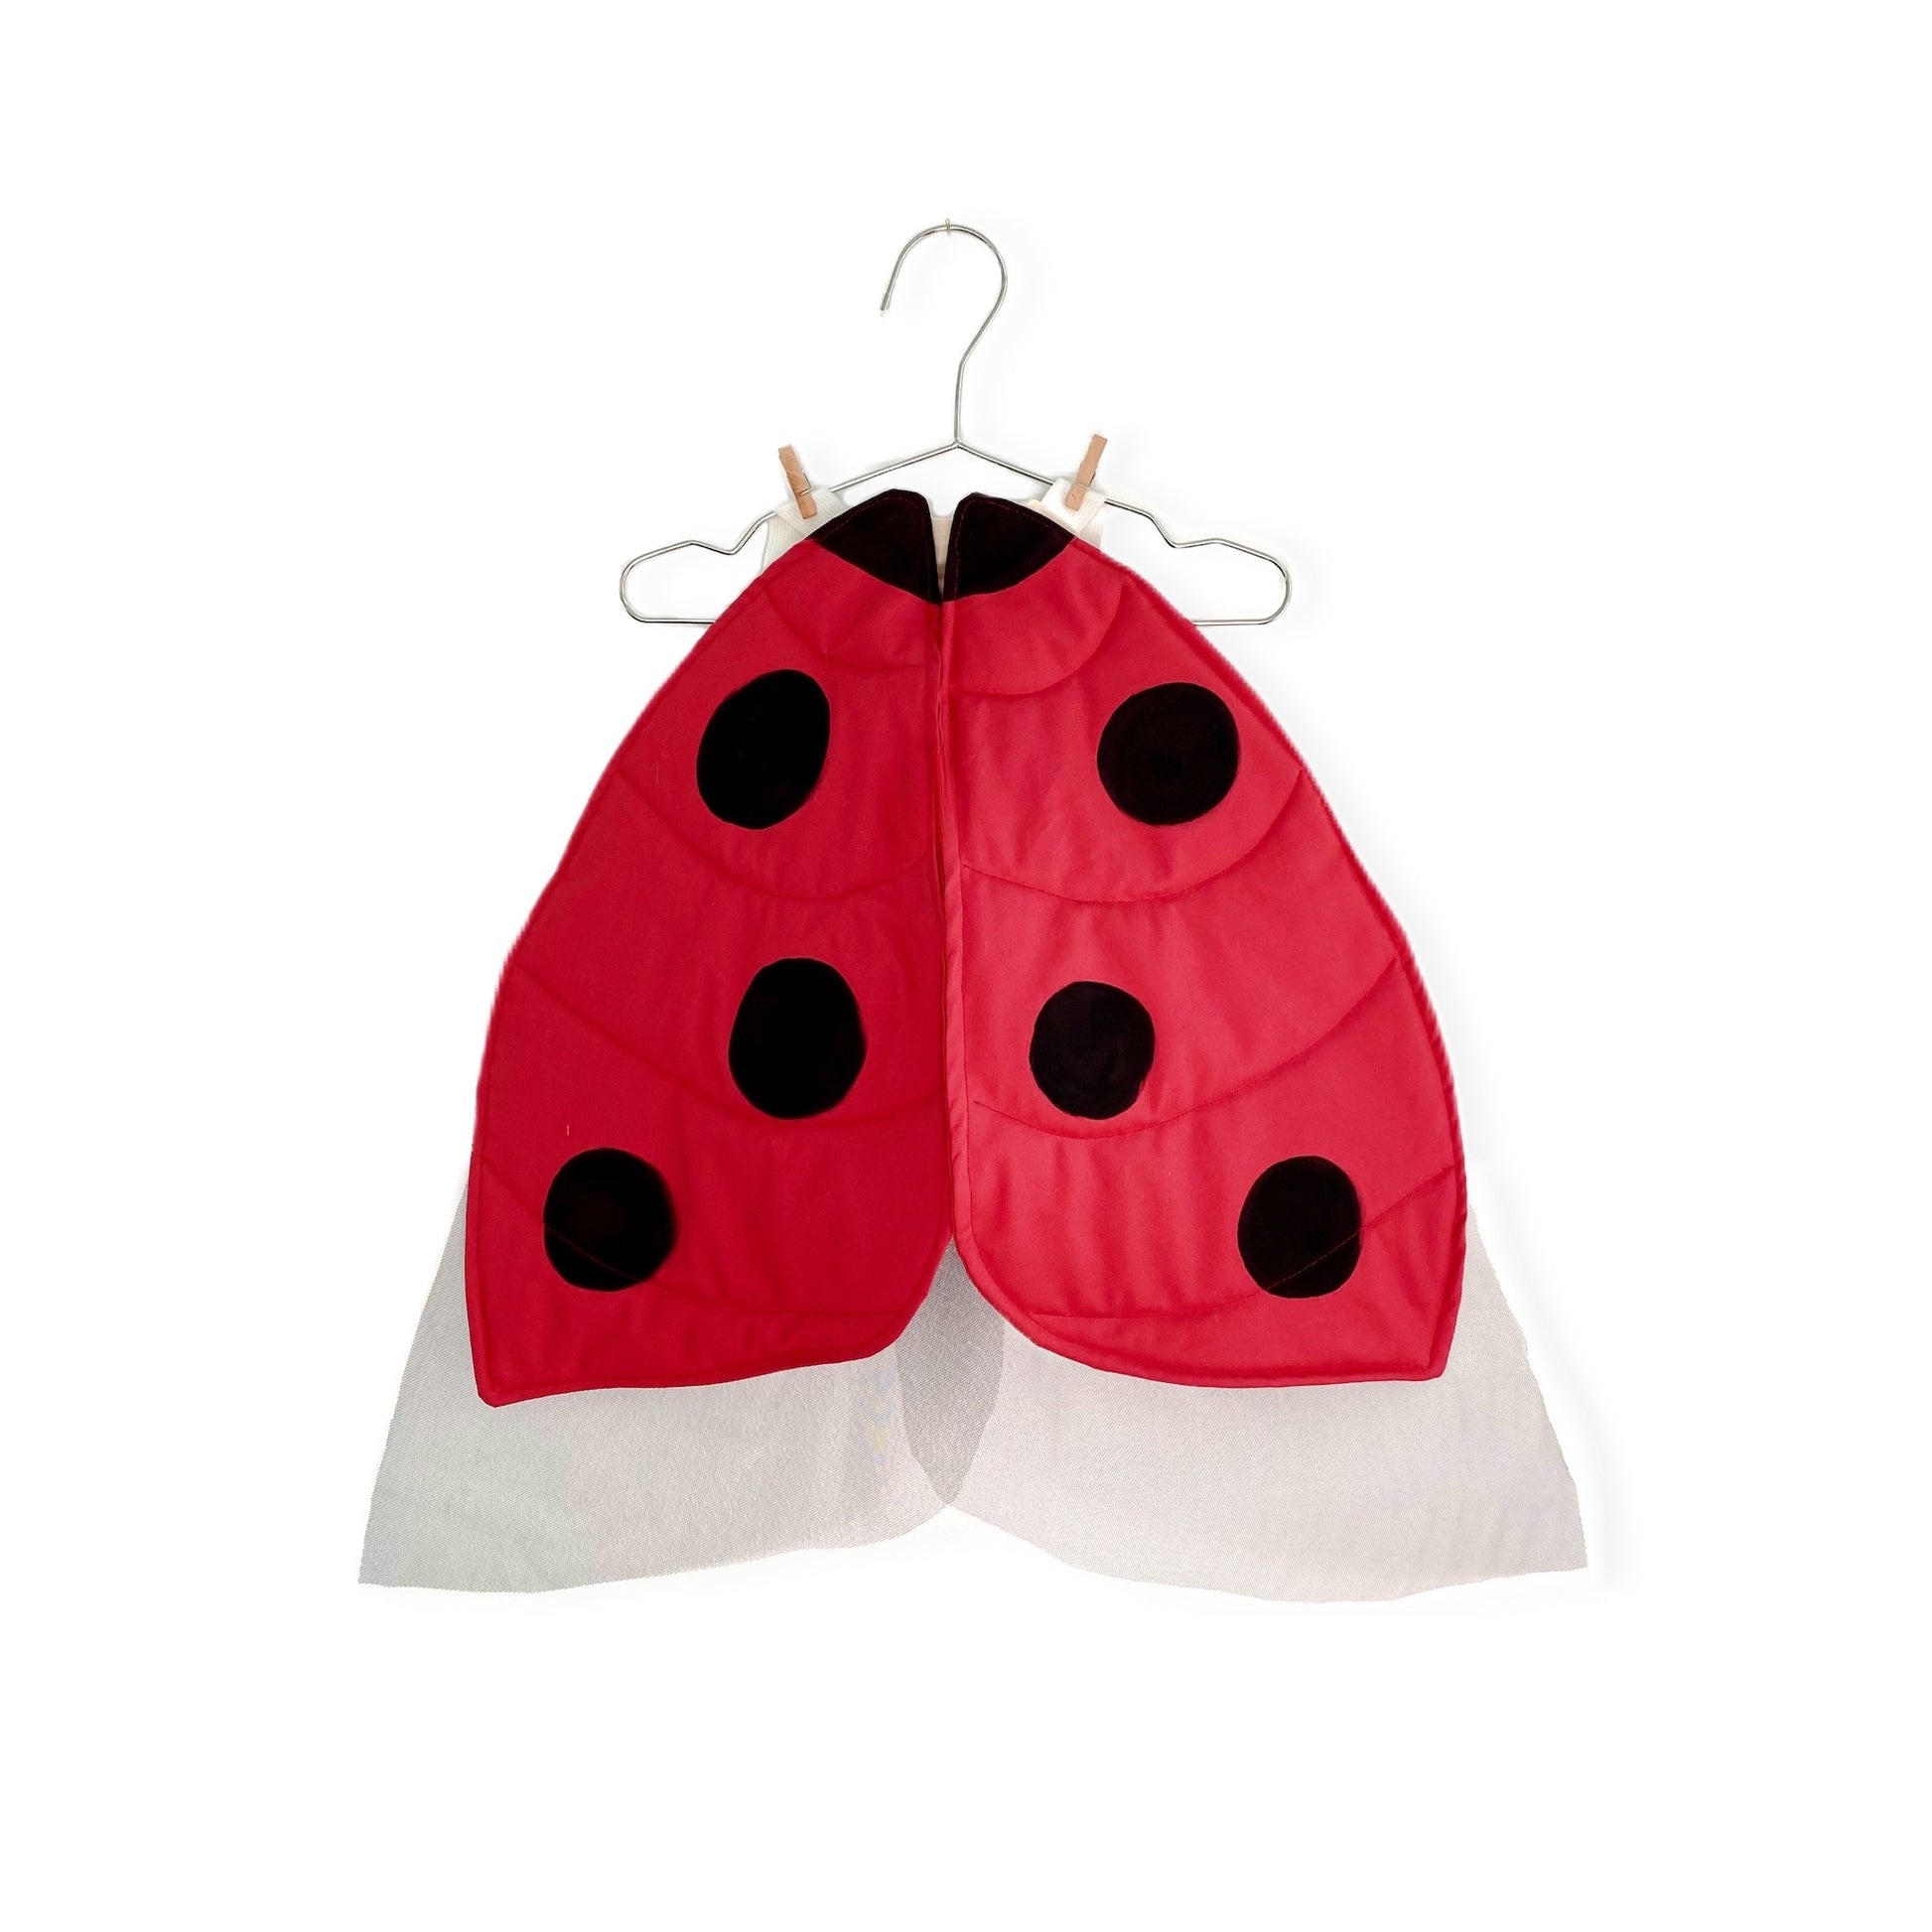 Ladybug costume for toddlers and children. 